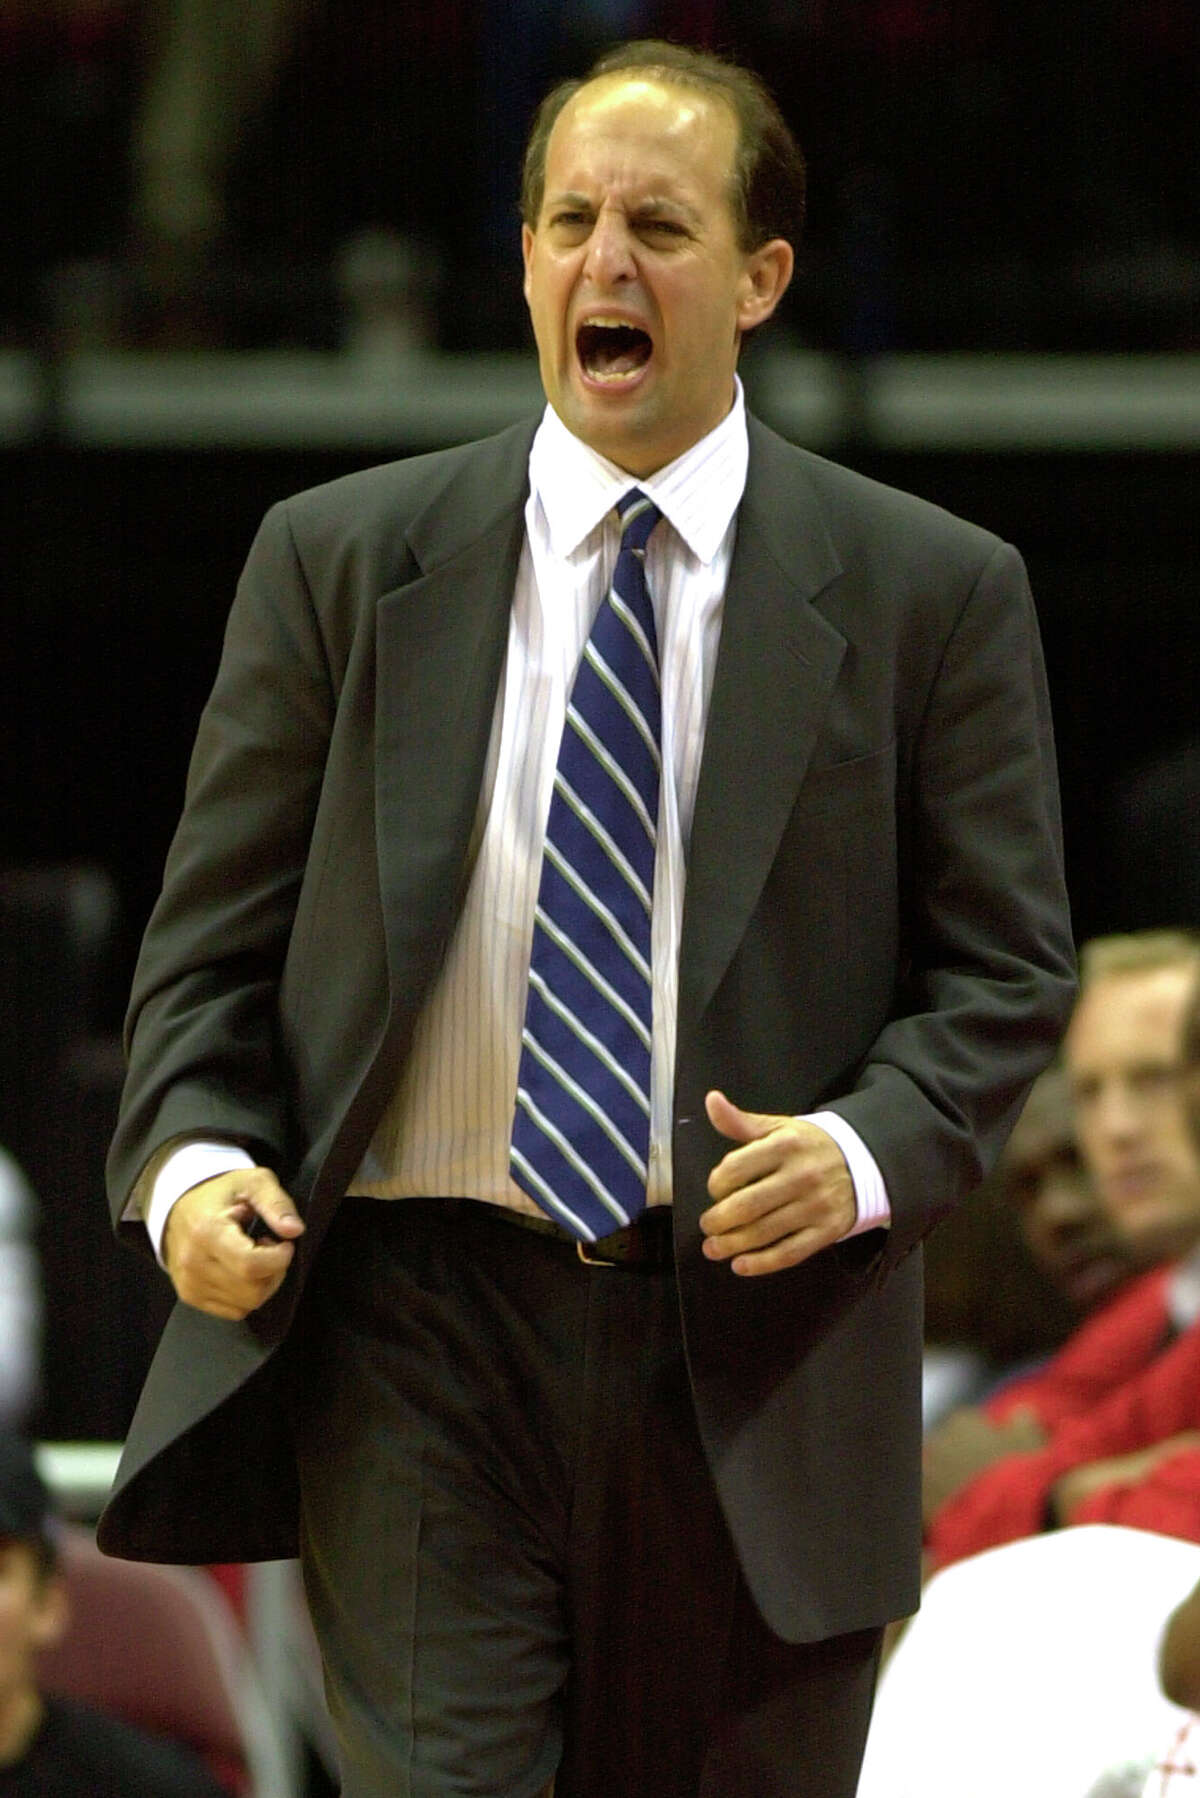 Houston Rockets coach Jeff Van Gundy yells during the fourth quarter against the Denver Nuggets, Thursday, Oct. 30, 2003, in Houston. Van Gundy won his first game as the Rockets head coach with a 102-85 win over the Nuggets. (AP Photo/Brett Coomer)